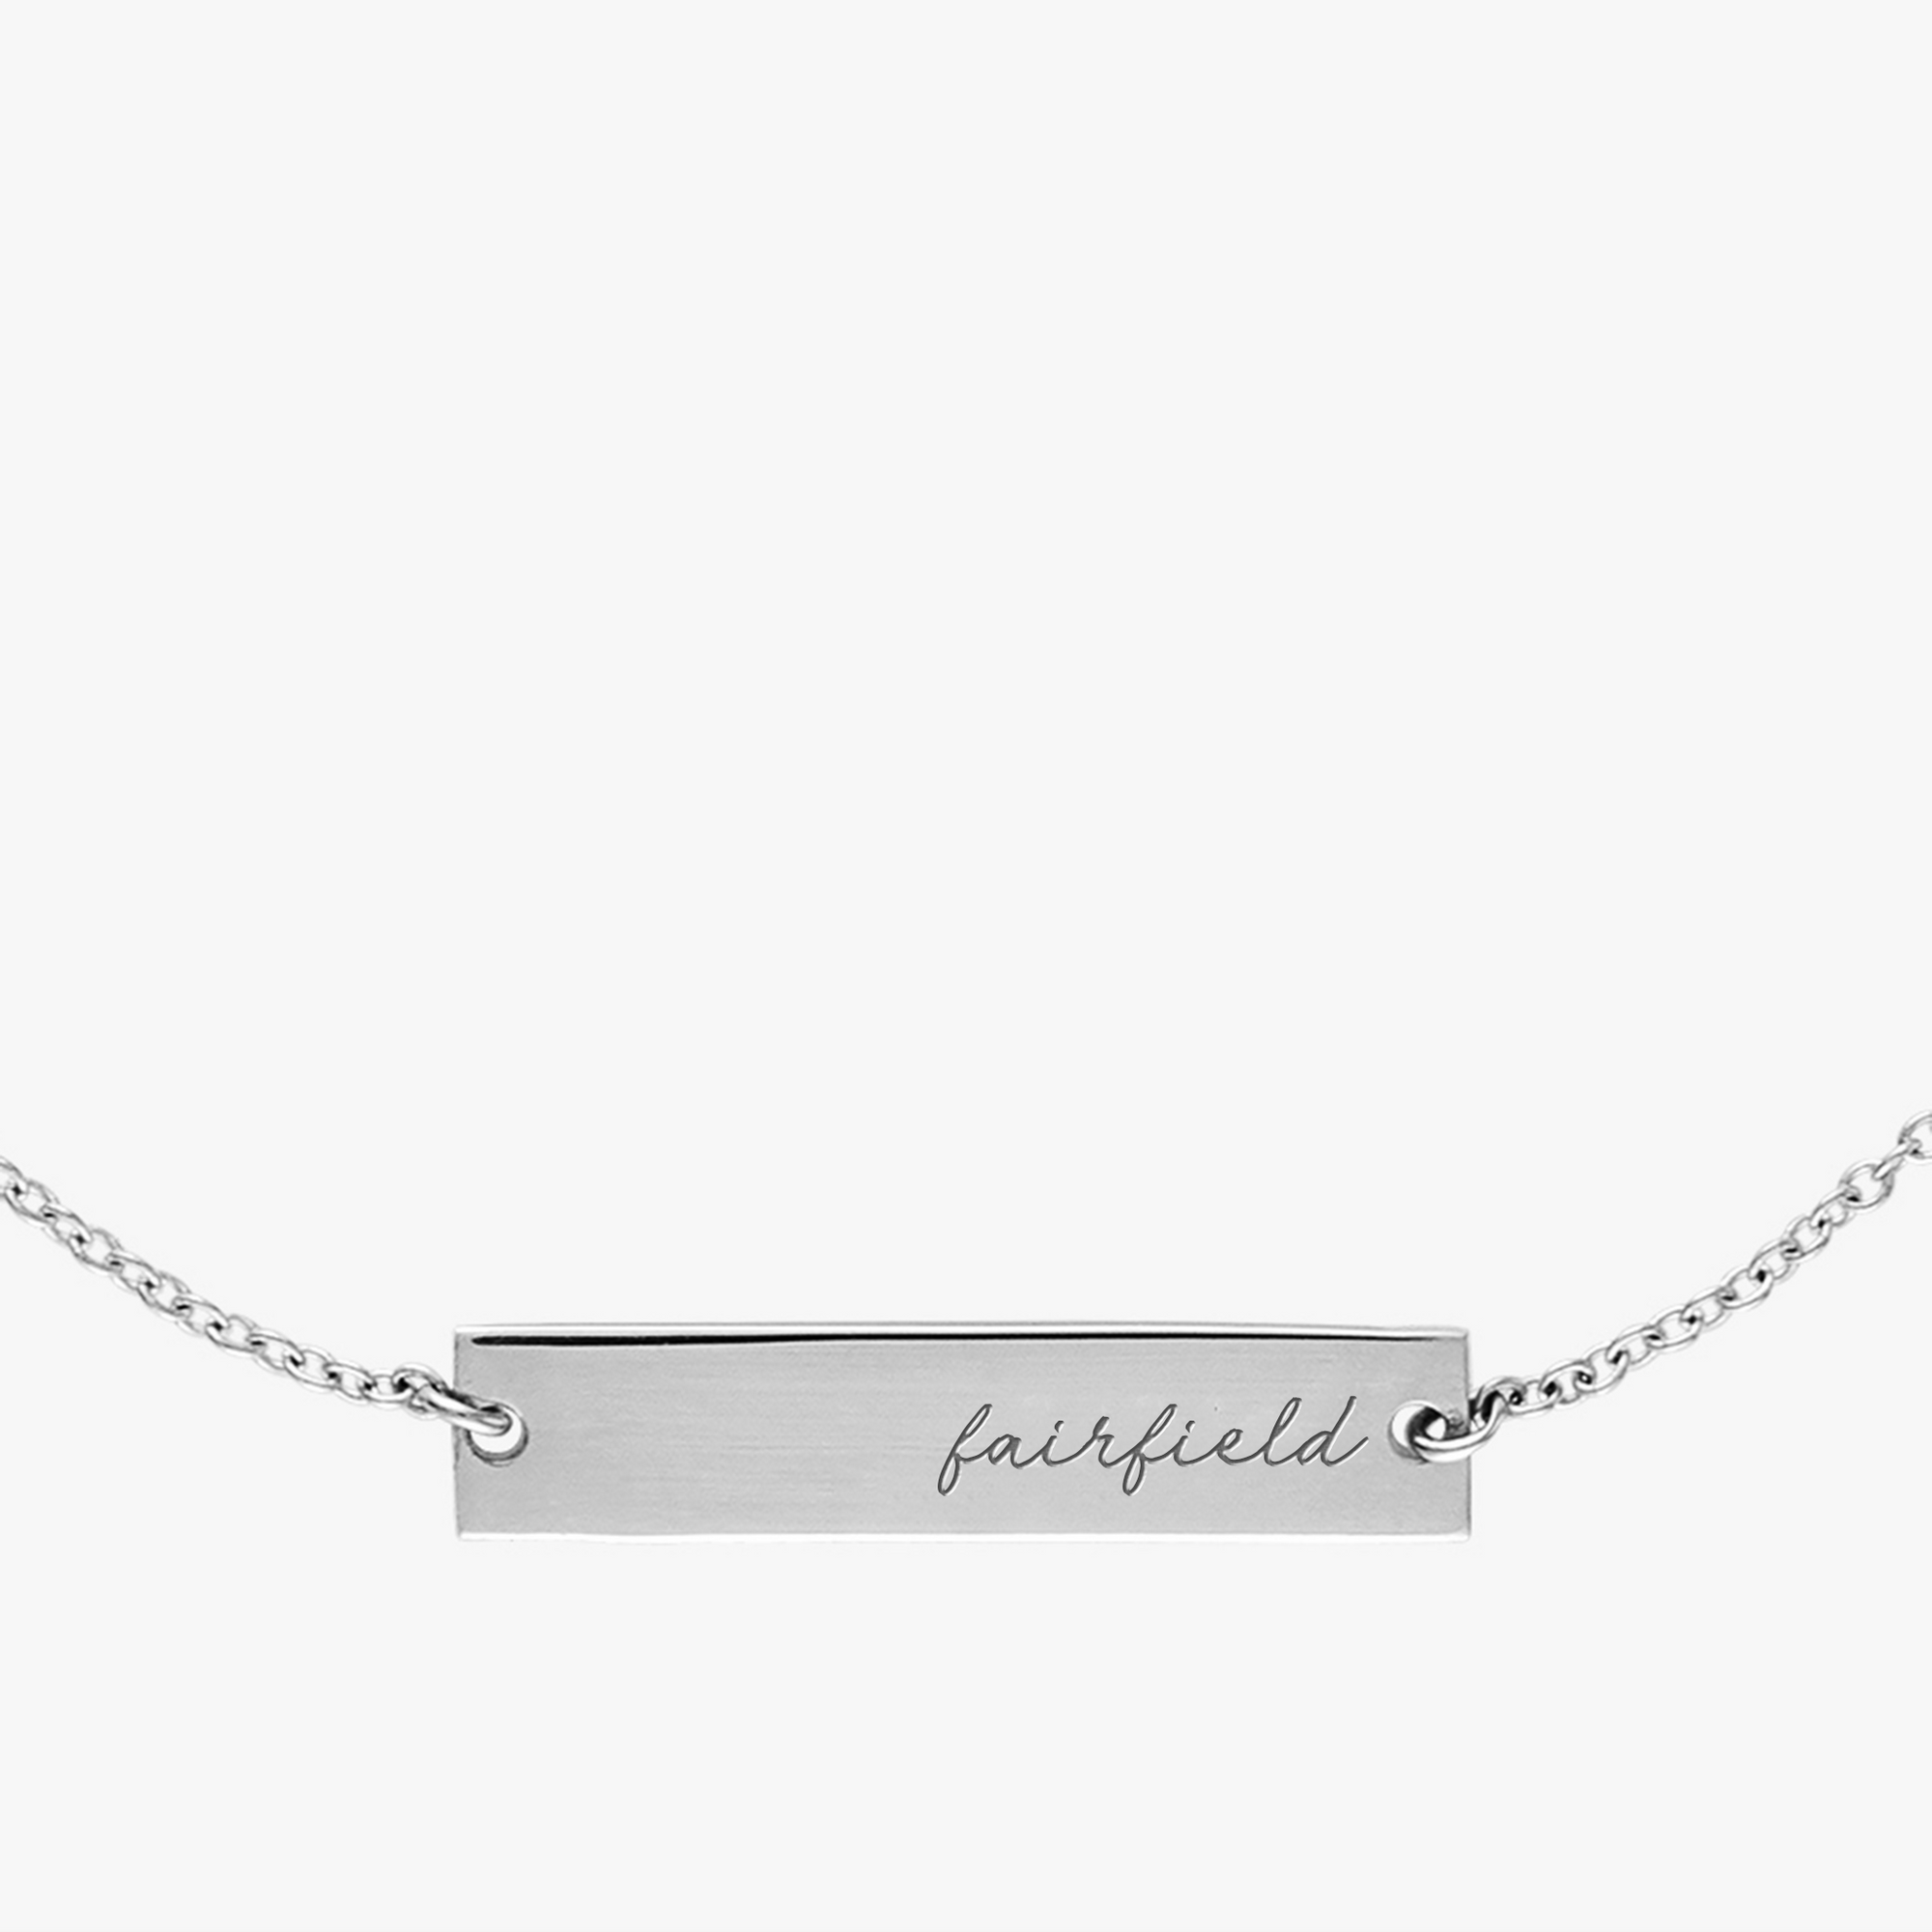 Fairfield University Horizontal Necklace Sterling Silver Close Up